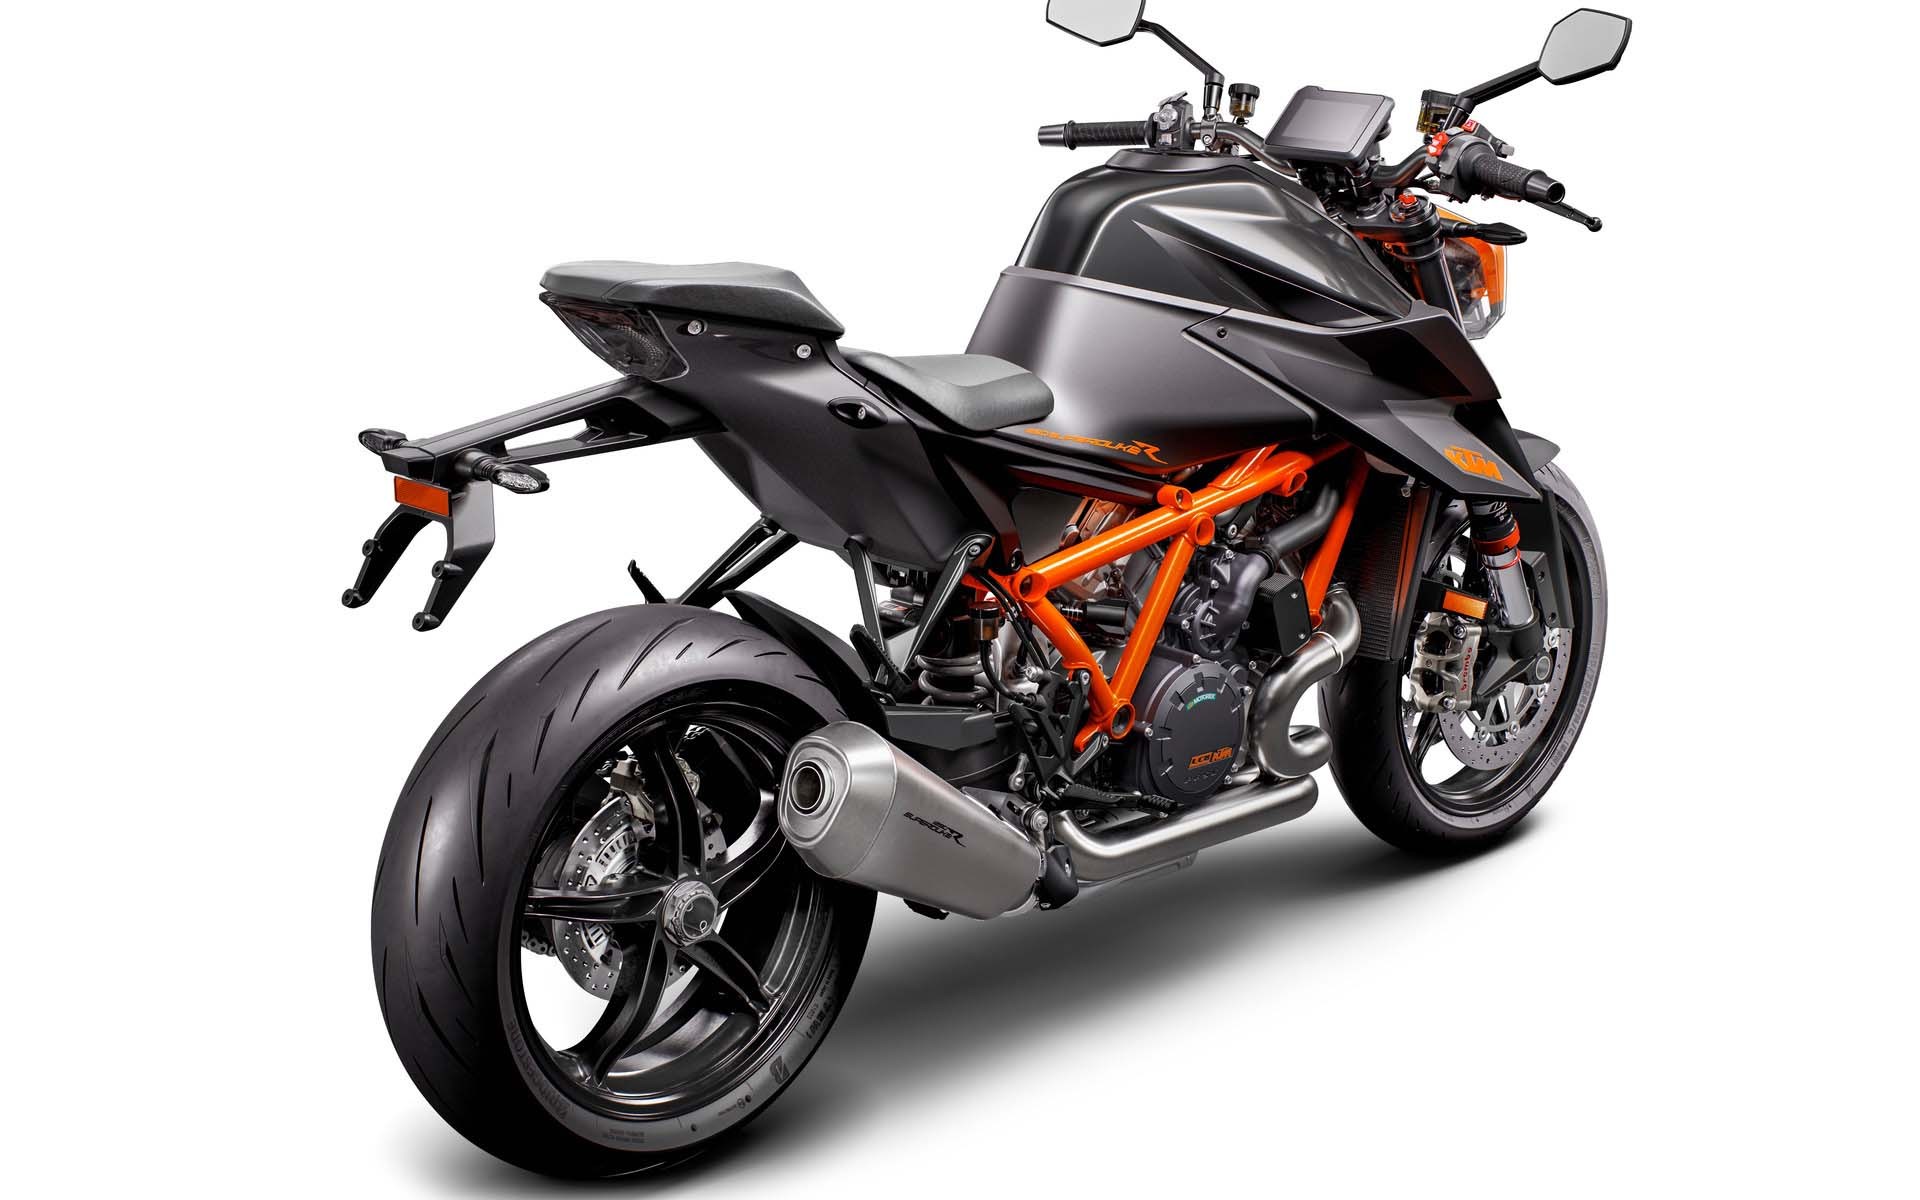 2020 KTM Super Duke R-4 - Motorcycle news, Motorcycle reviews from